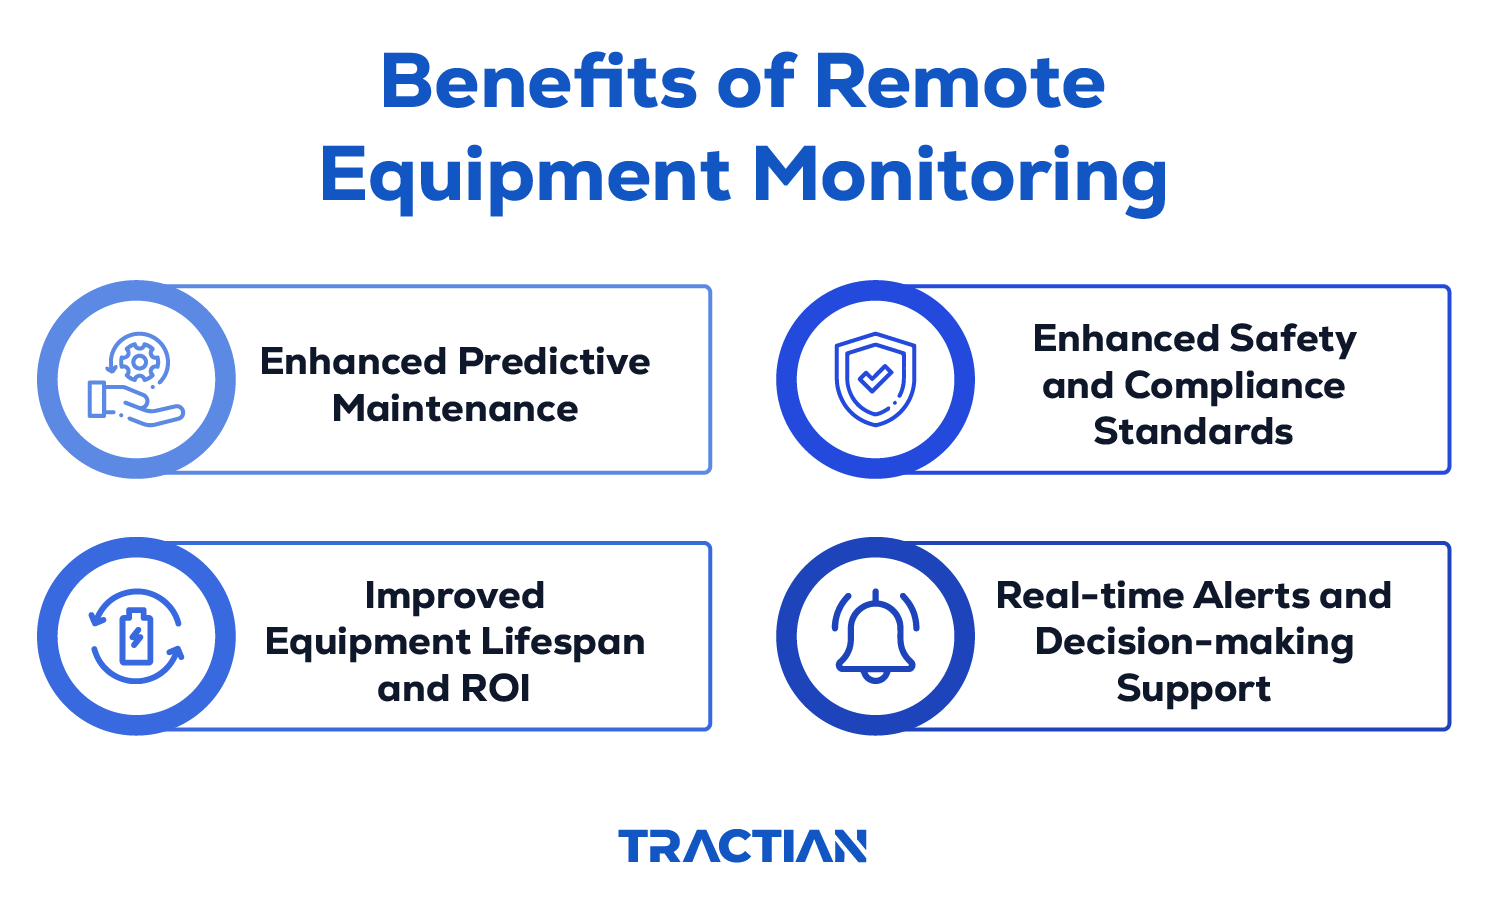 Benefits of remote monitoring